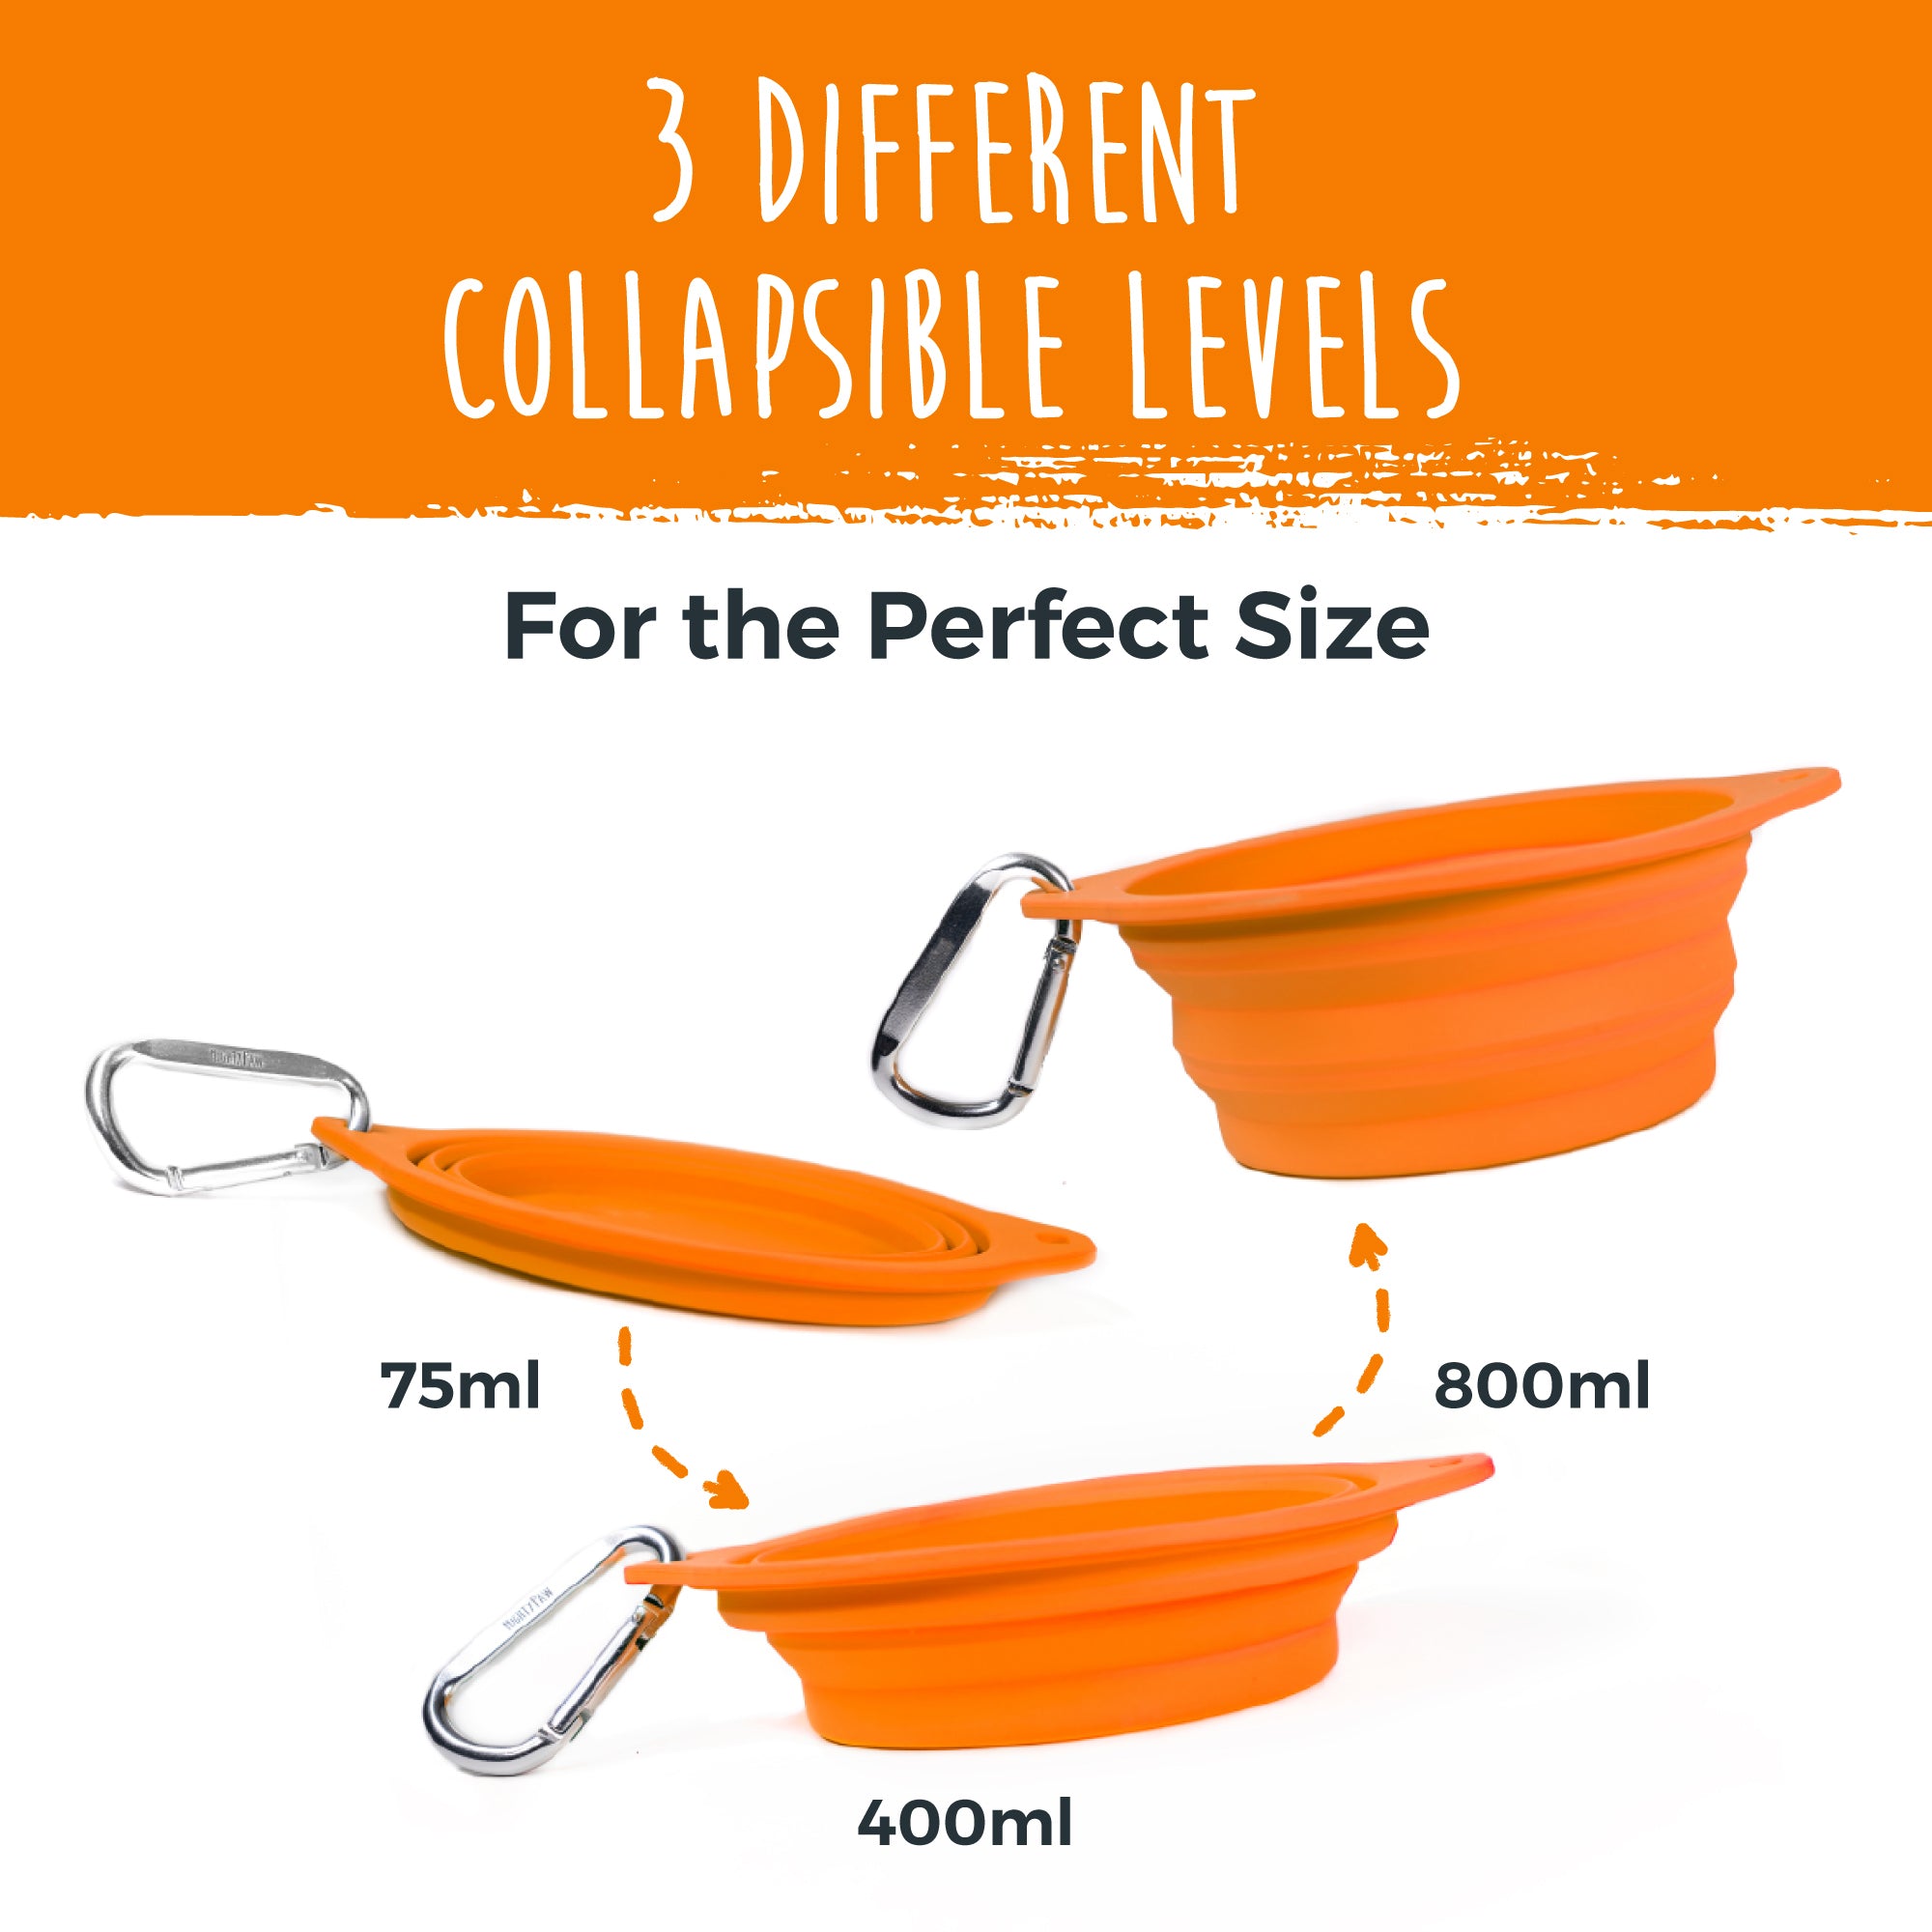 3-in-1 Portable Dog Feeder/Water Cup and Collapsible Bowl - My Eco Boutique